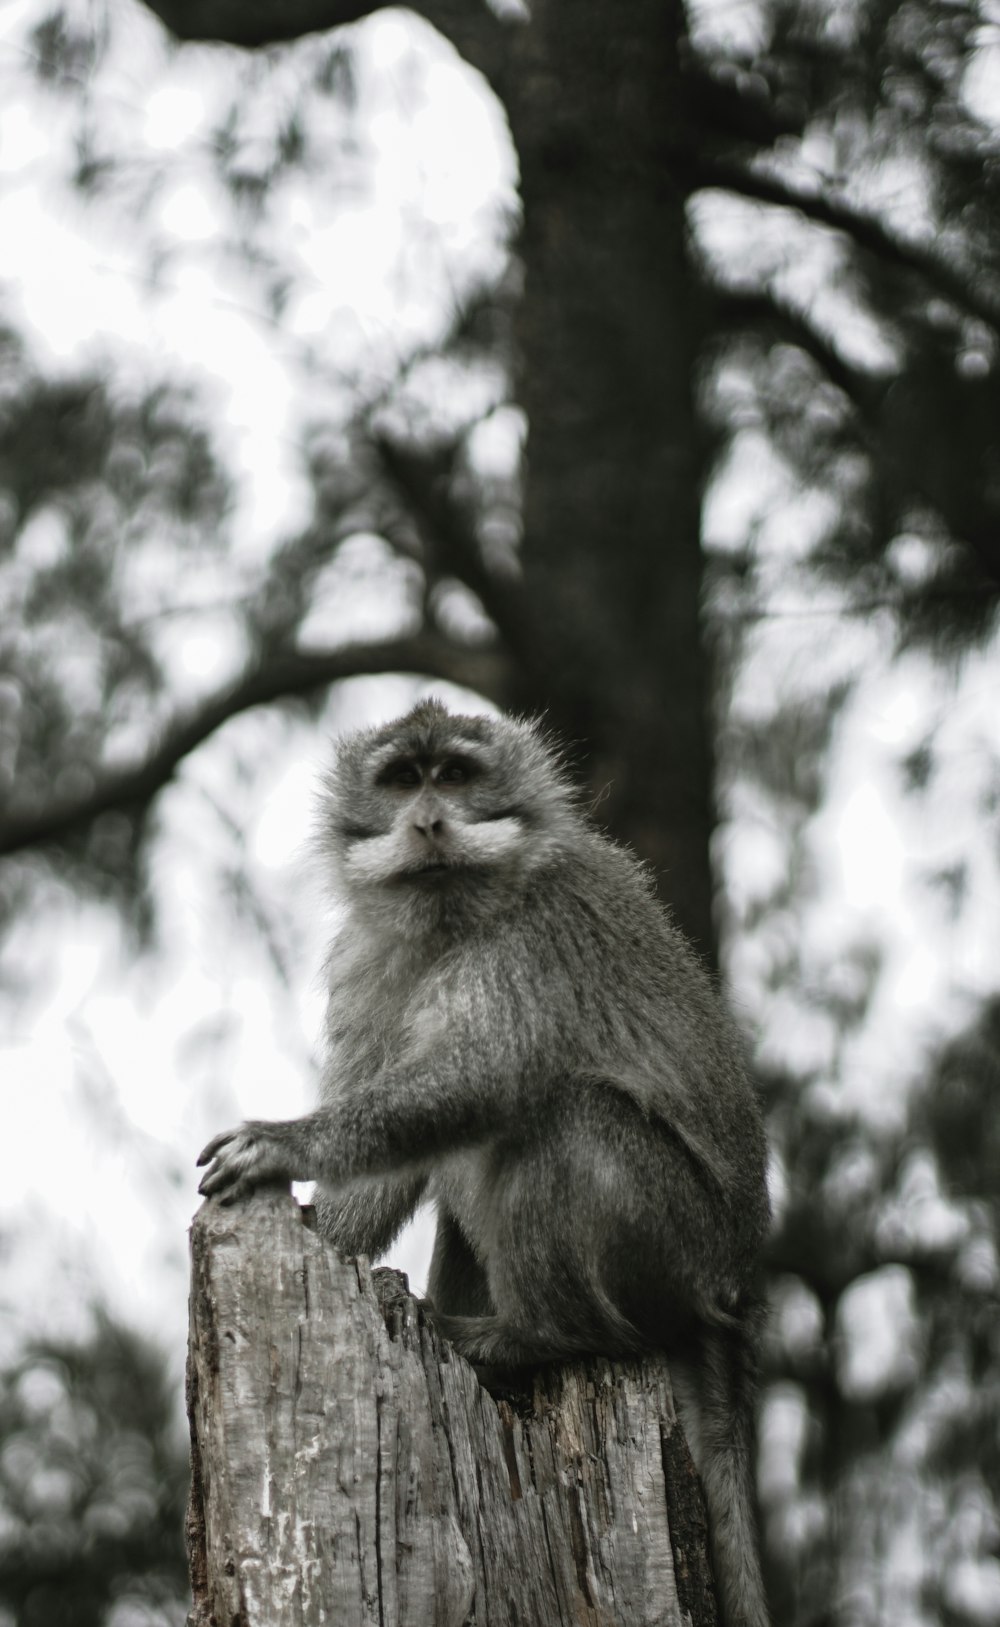 a small monkey sitting on top of a wooden post